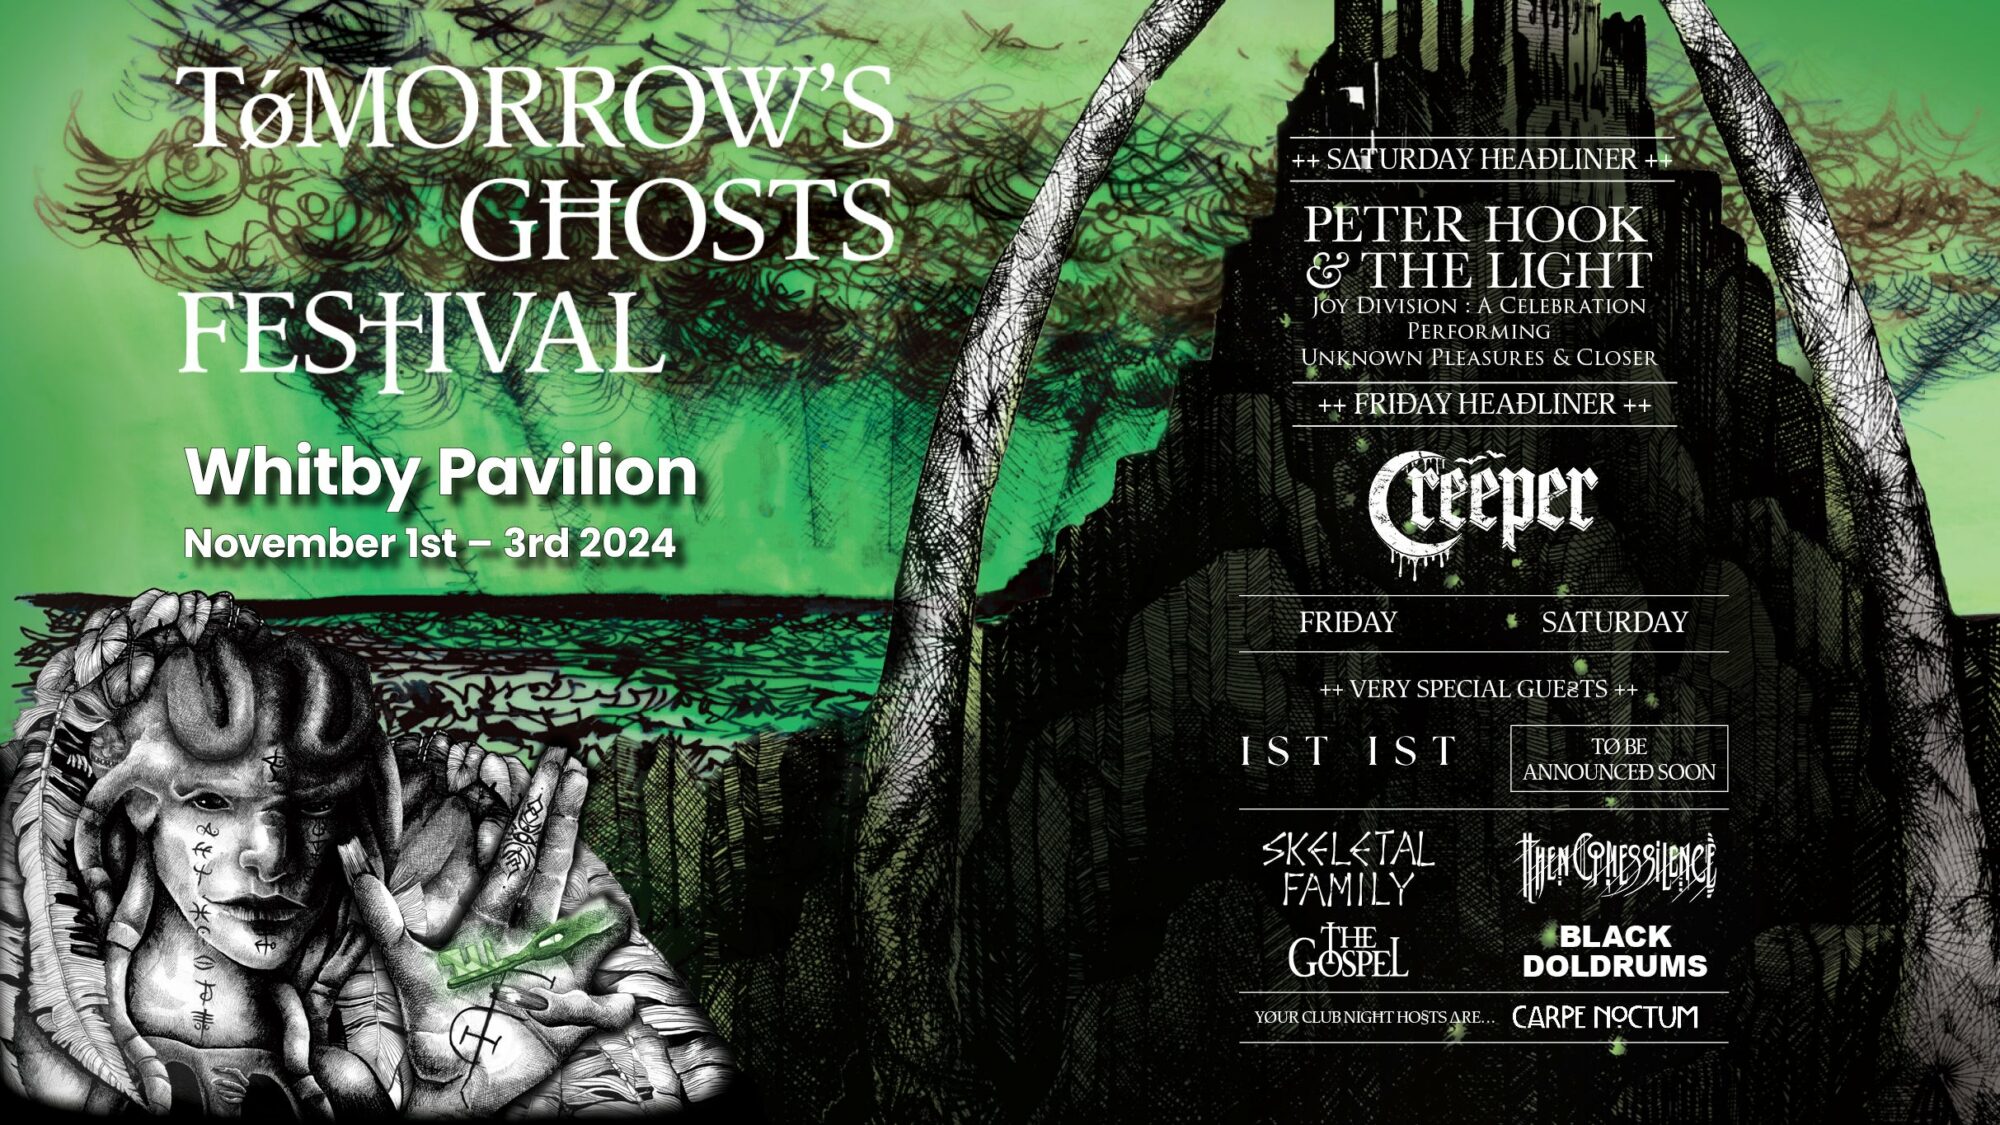 Image name Tomorrows Ghosts Festival Friday Night Ticket at Whitby Pavilion Northern Lights Suite Whitby the 14 image from the post Tomorrows Ghosts Festival Saturday Night Ticket at Whitby Pavilion Northern Lights Suite, Whitby in Yorkshire.com.